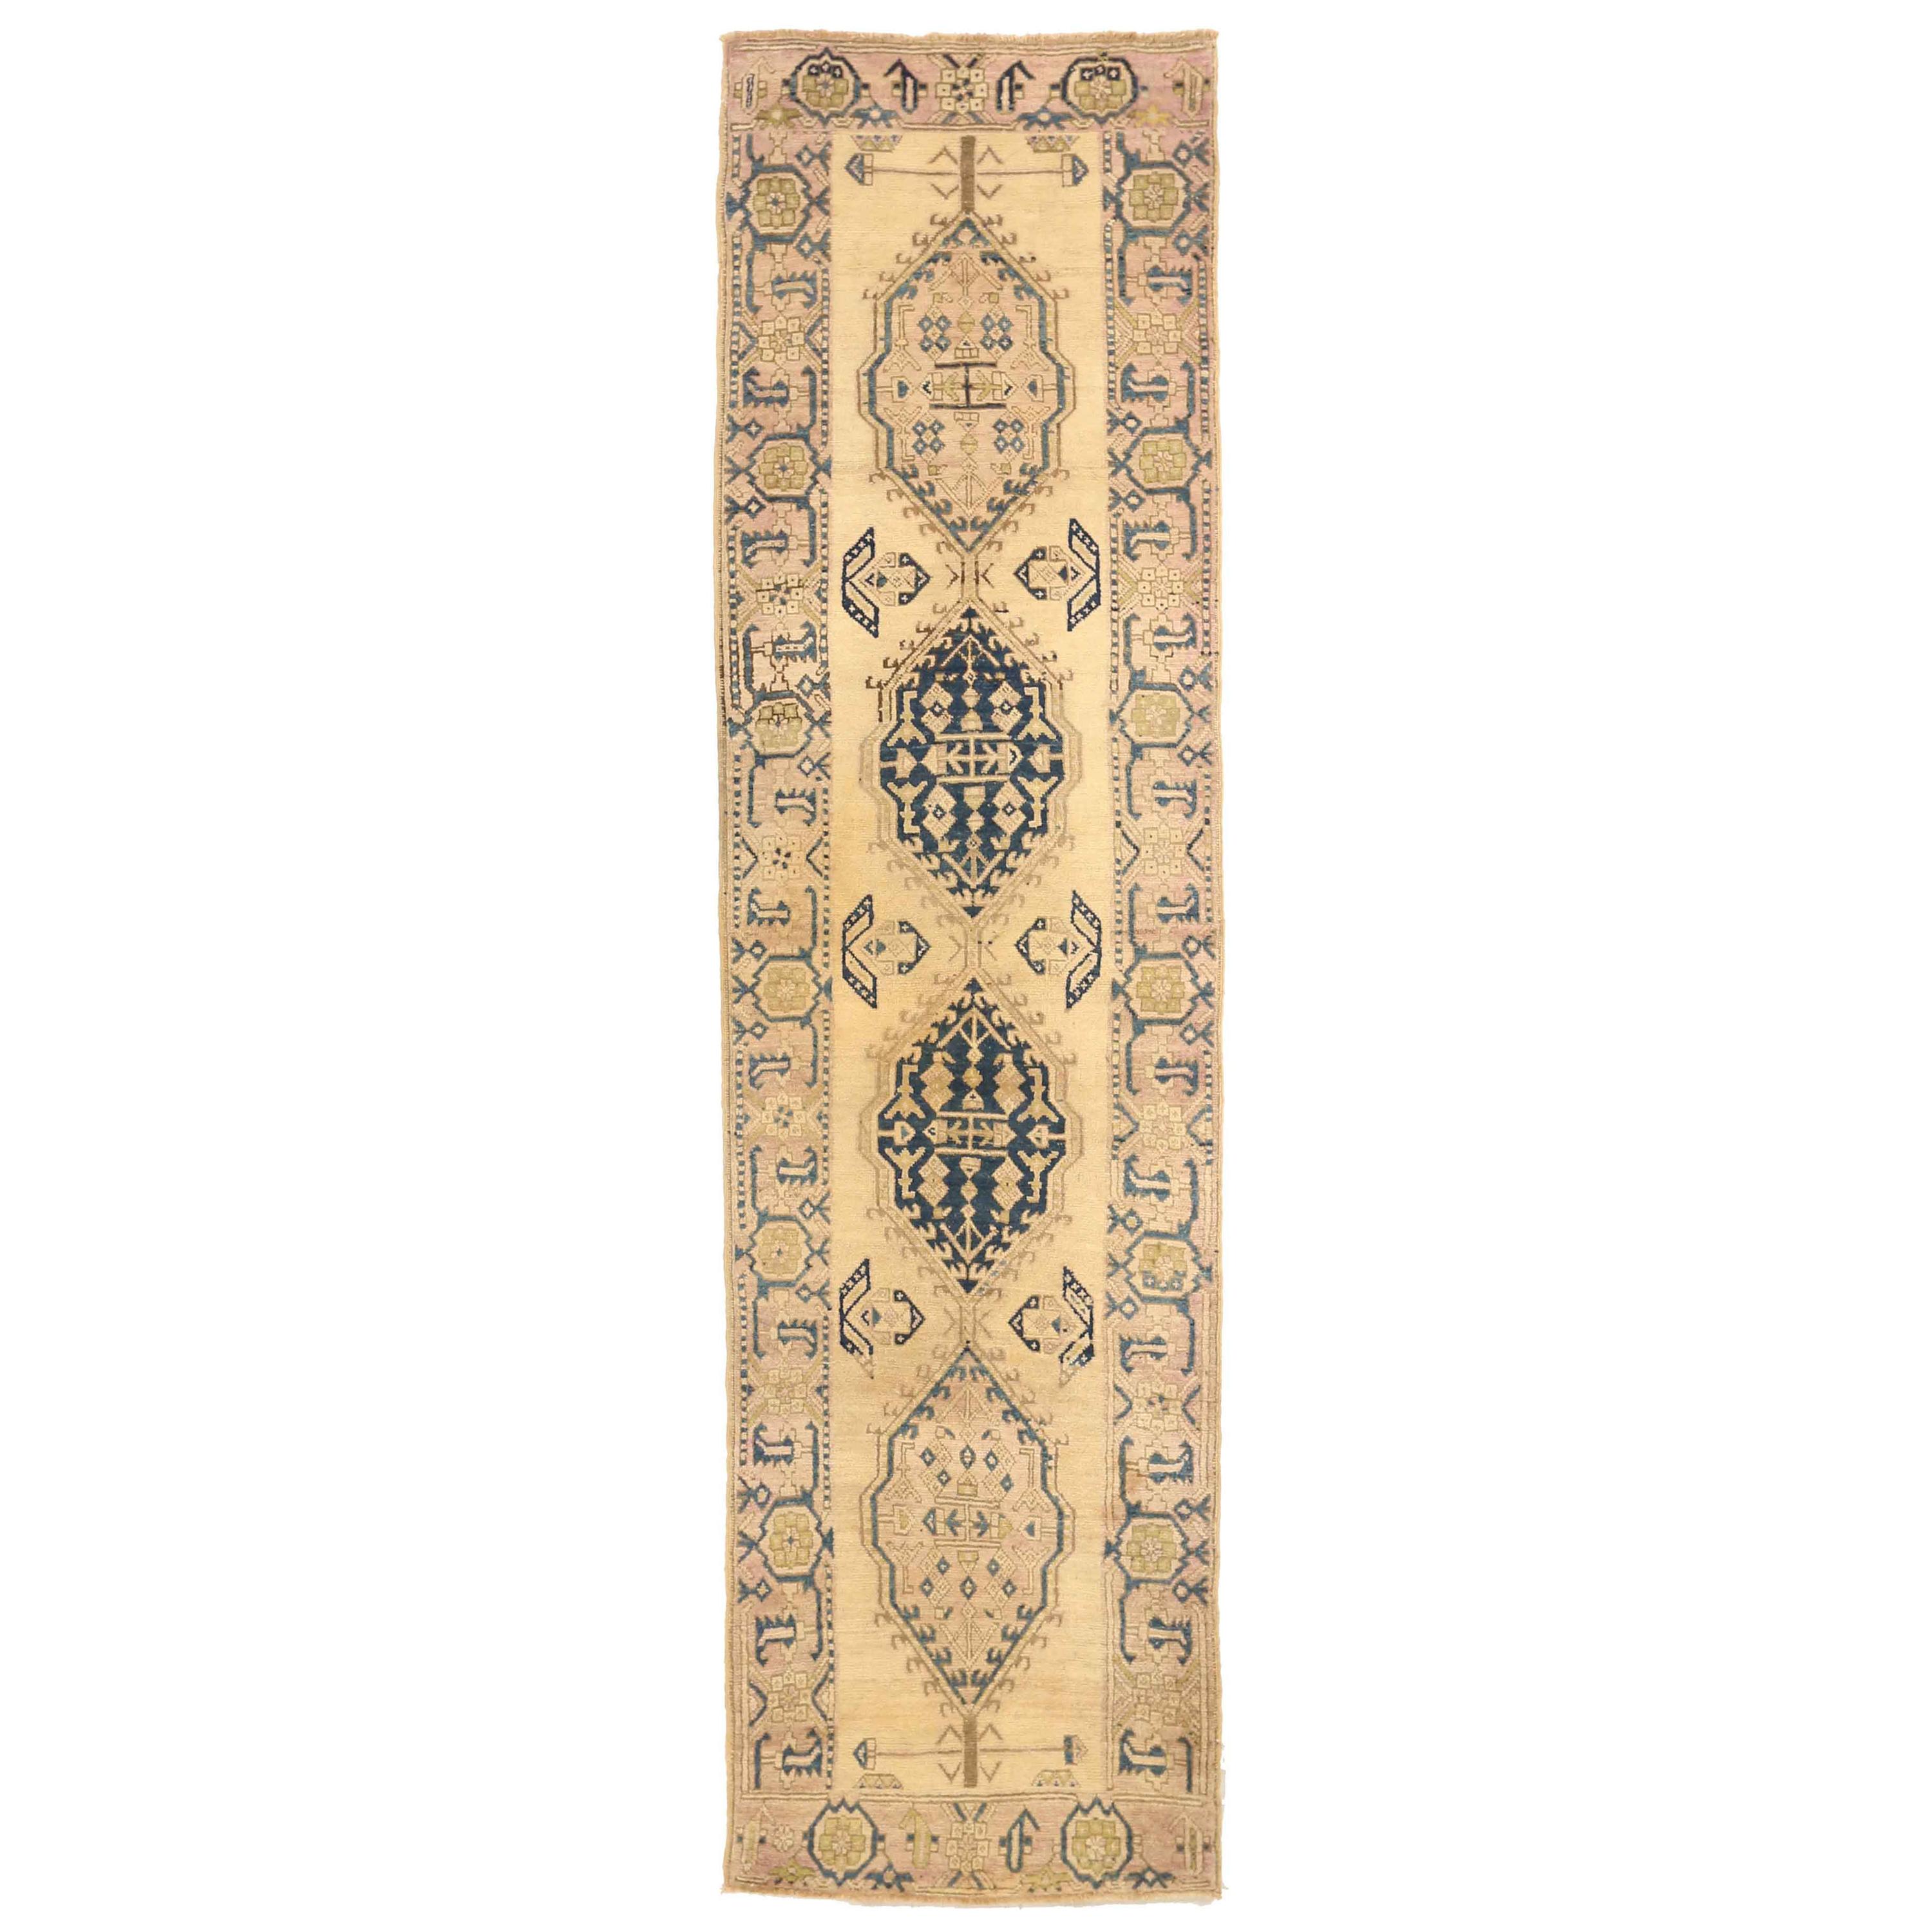 Antique Persian Rug Sarab Design with Camel Hair Tribal Patterns, circa 1910s For Sale